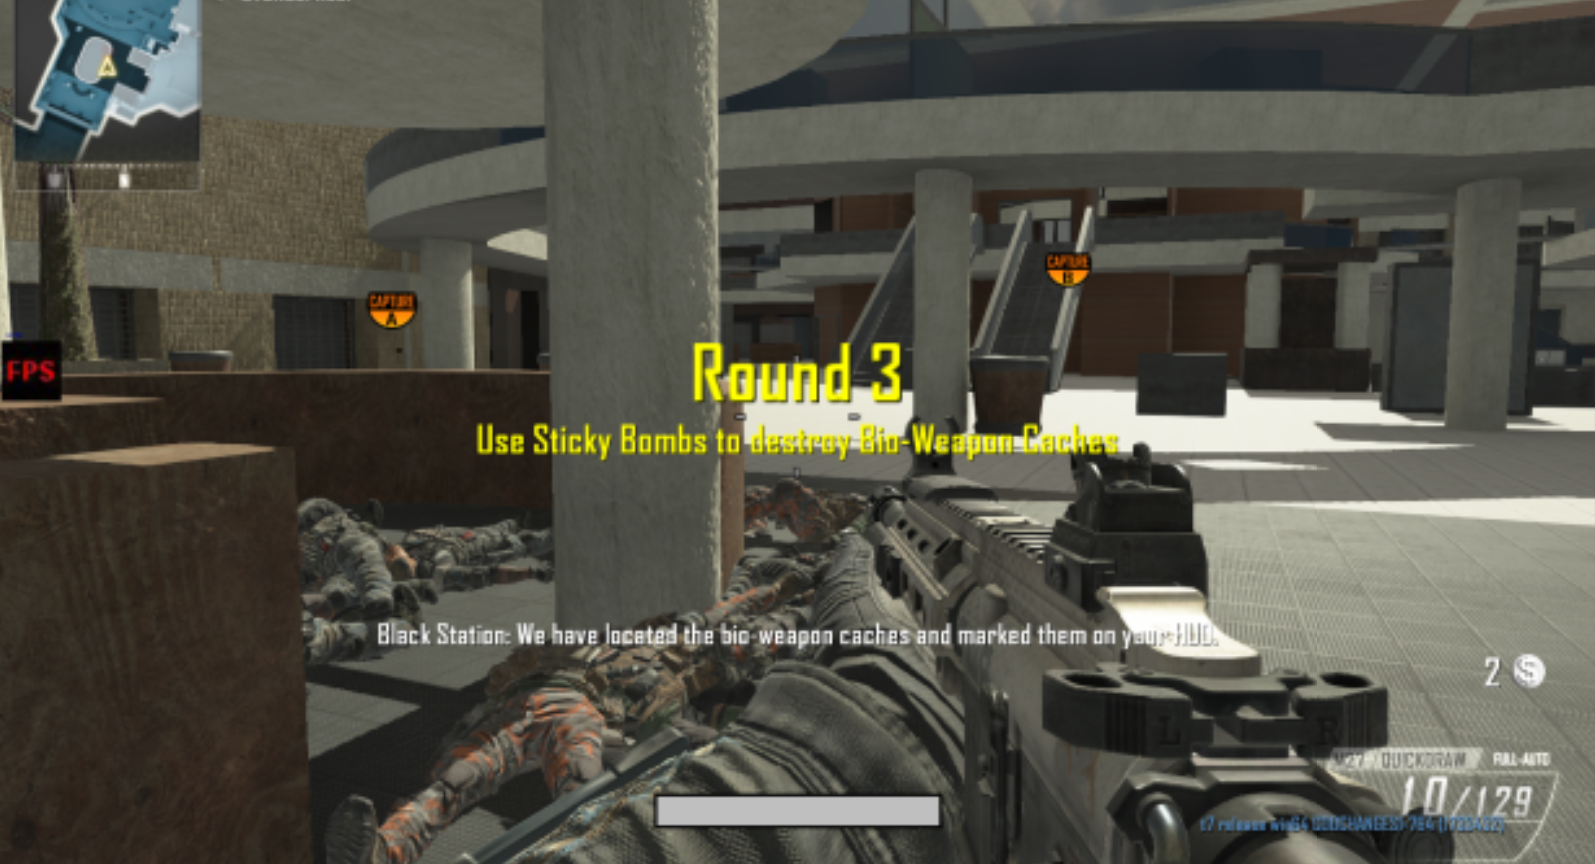 A leaked image reveals information about a game mode that requires the player to destroy bio-weapon caches using Sticky Bombs.